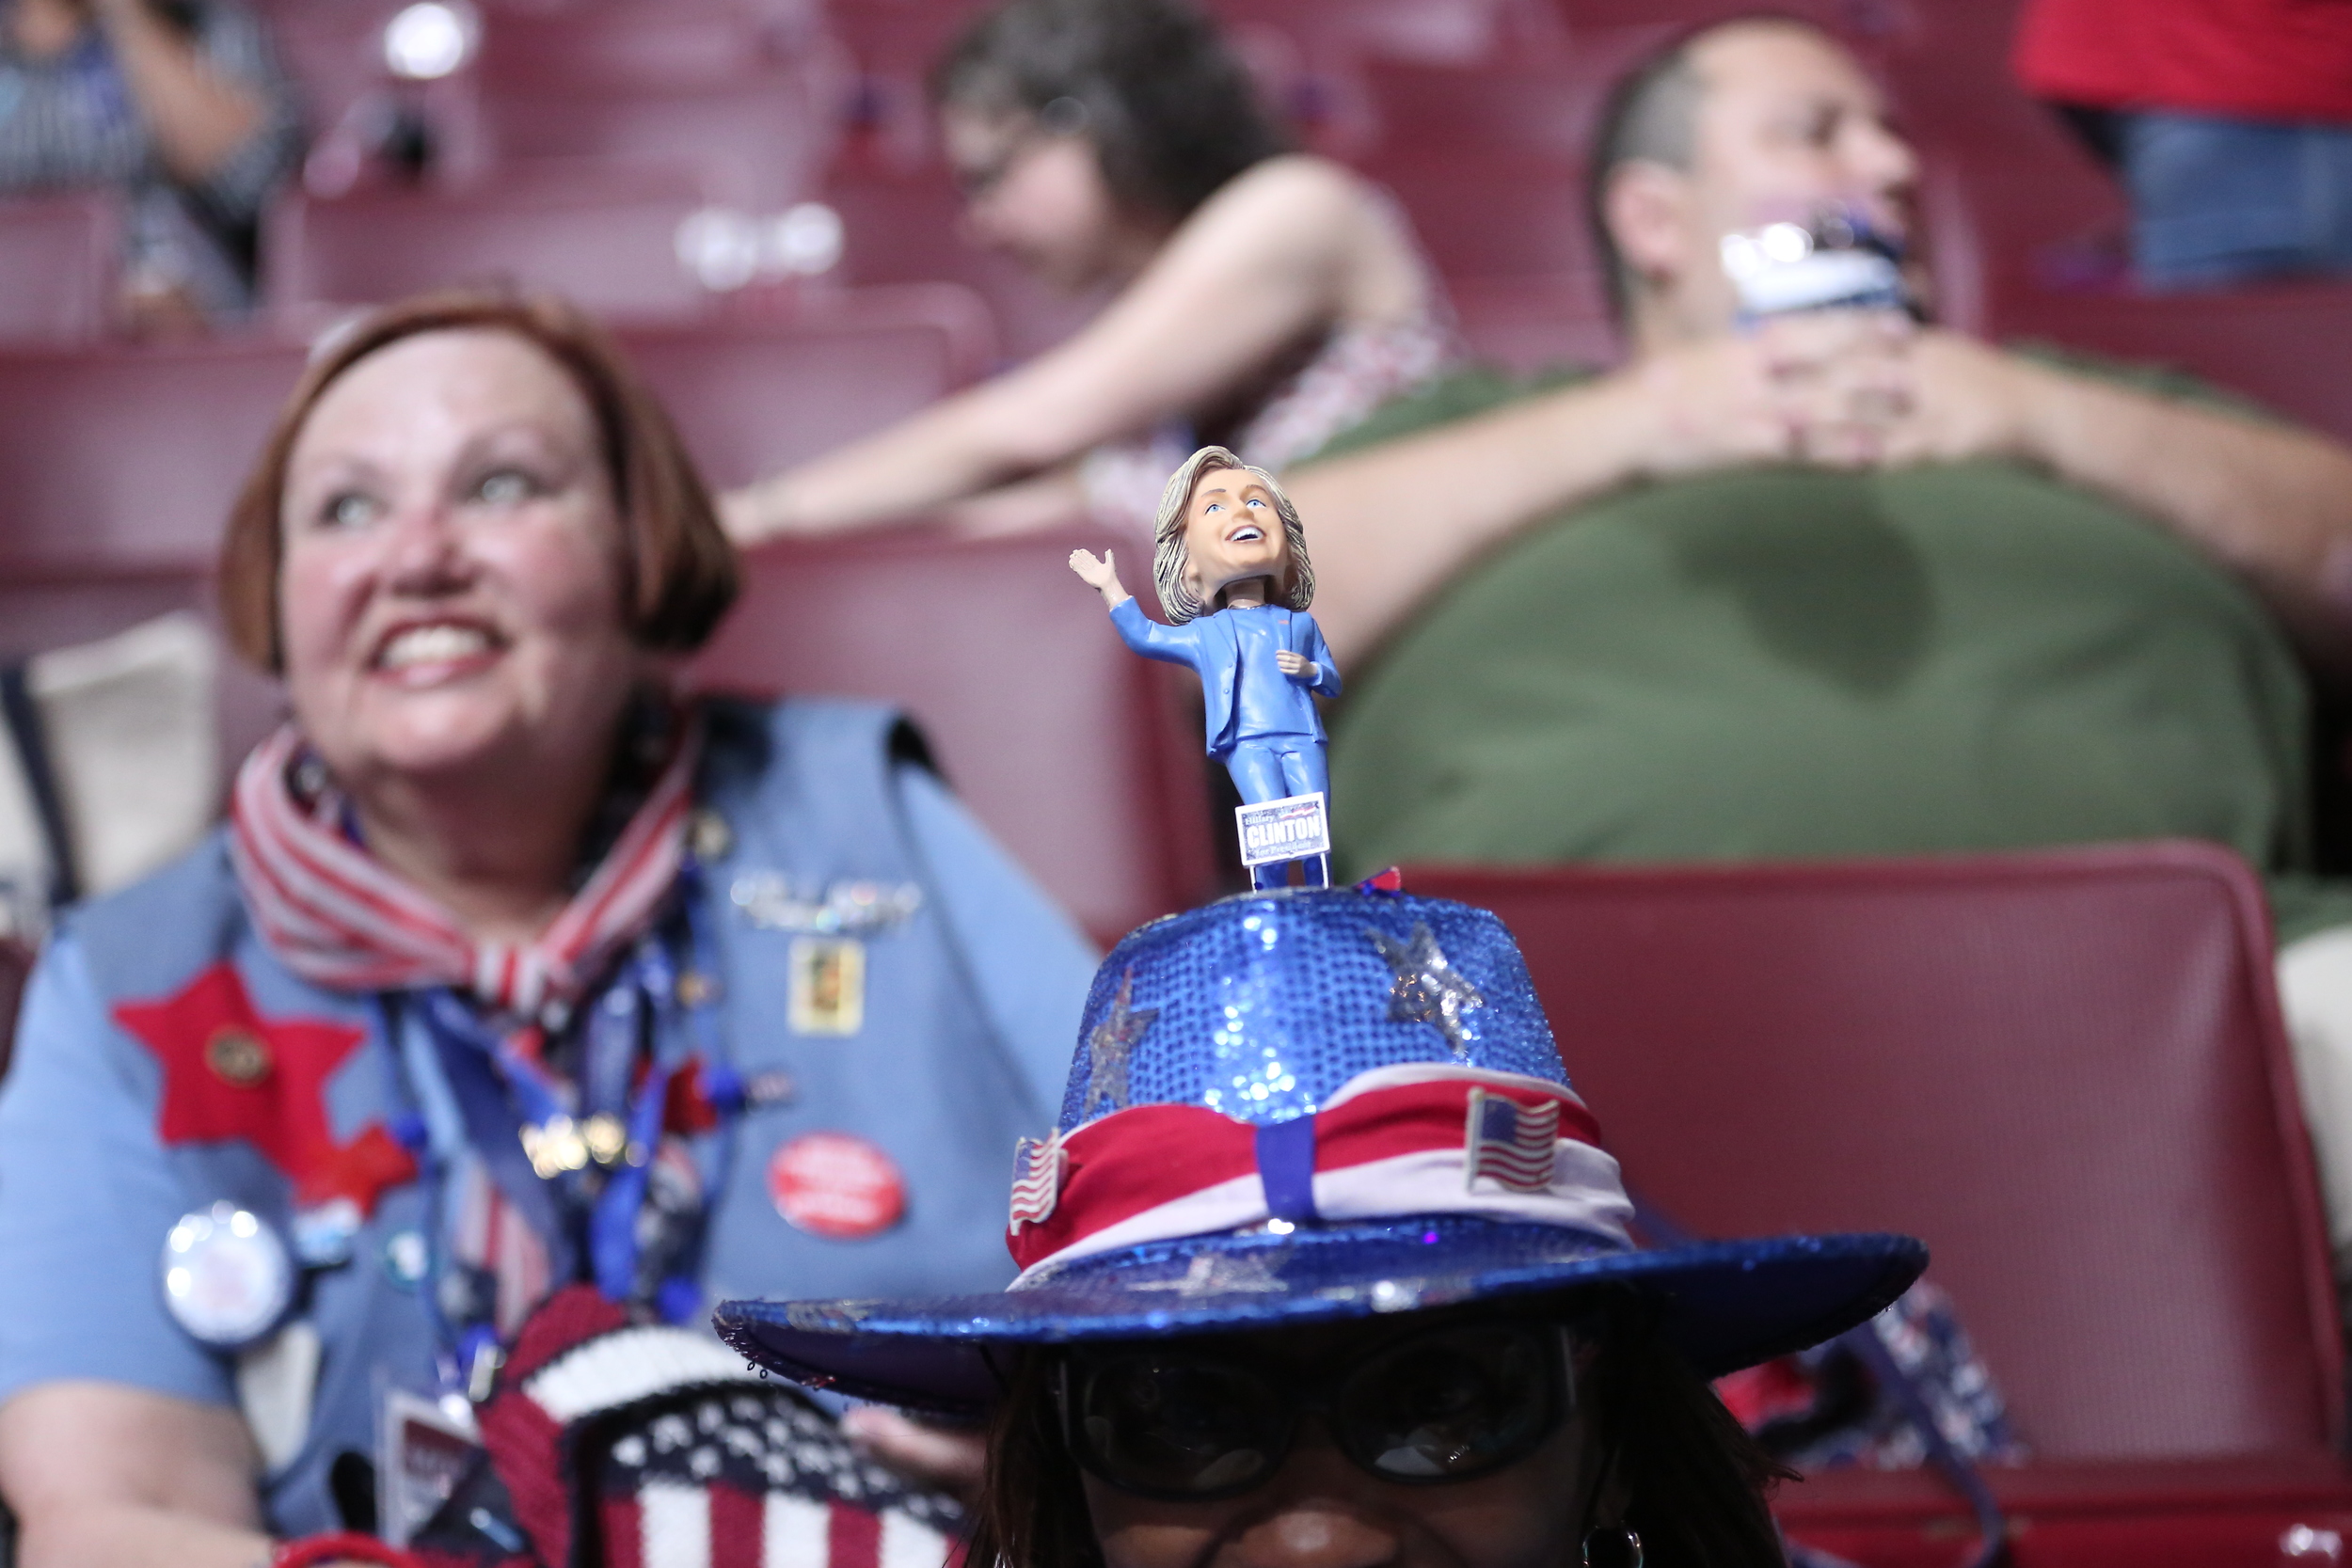  Audience members at the 2016 Democratic National Convention in Philadelphia, Pa. 